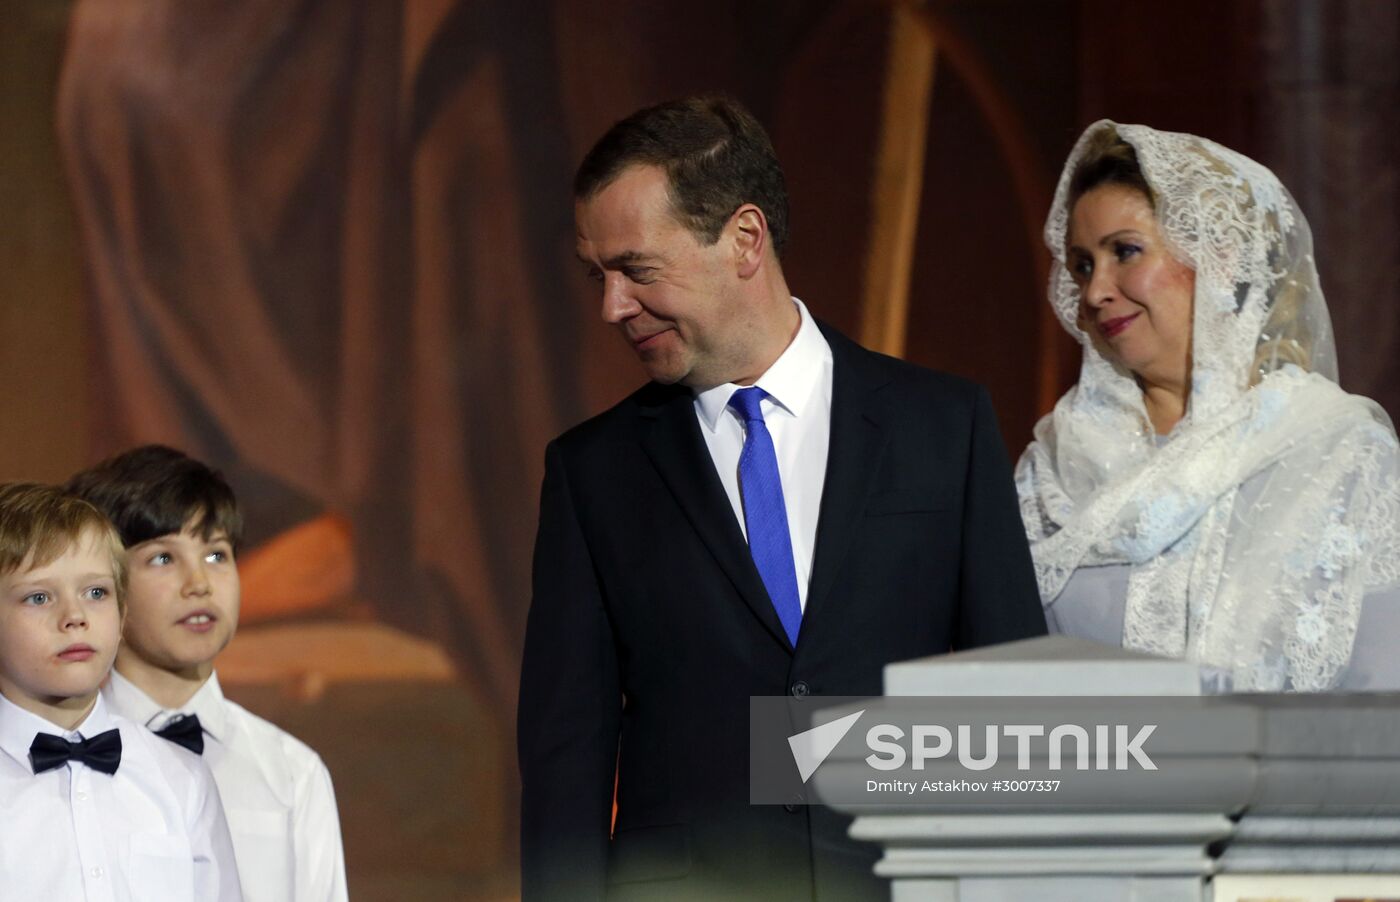 Prime Minister Medvedev attends Christmas service at Cathedral of Christ the Savior